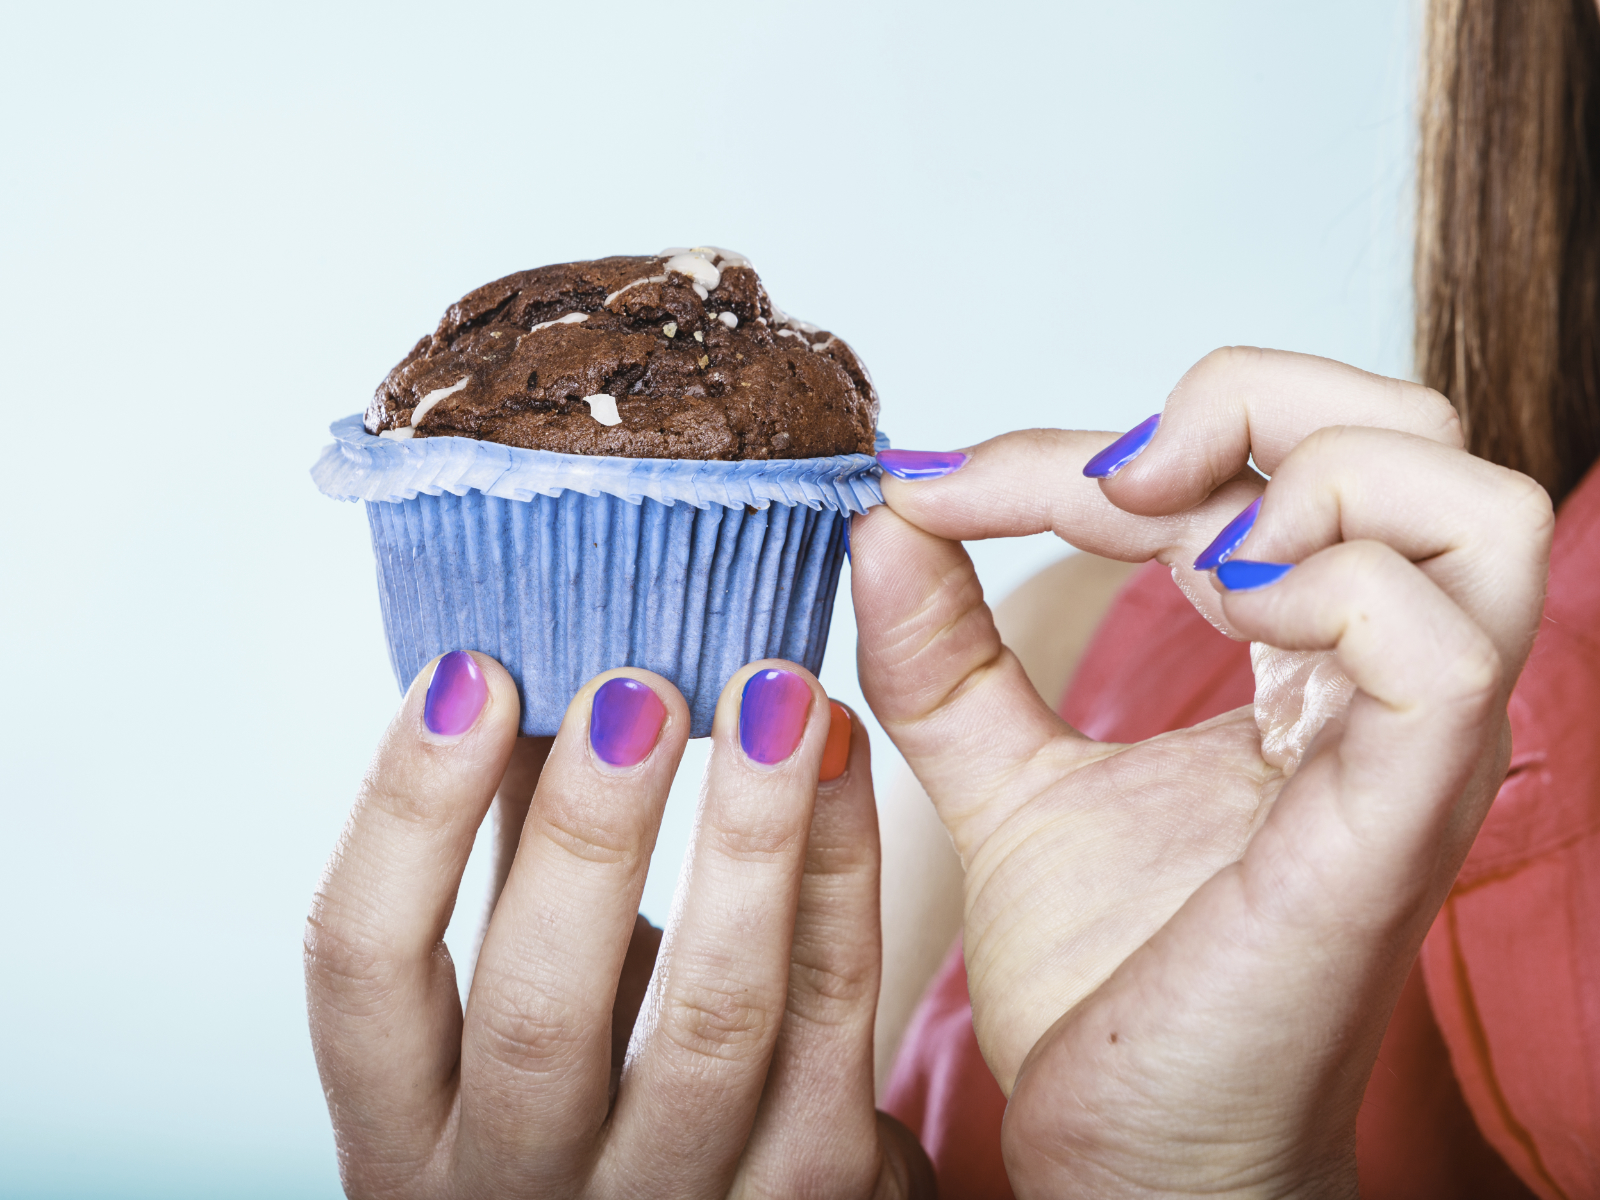 woman unwrapping a chocolate muffin